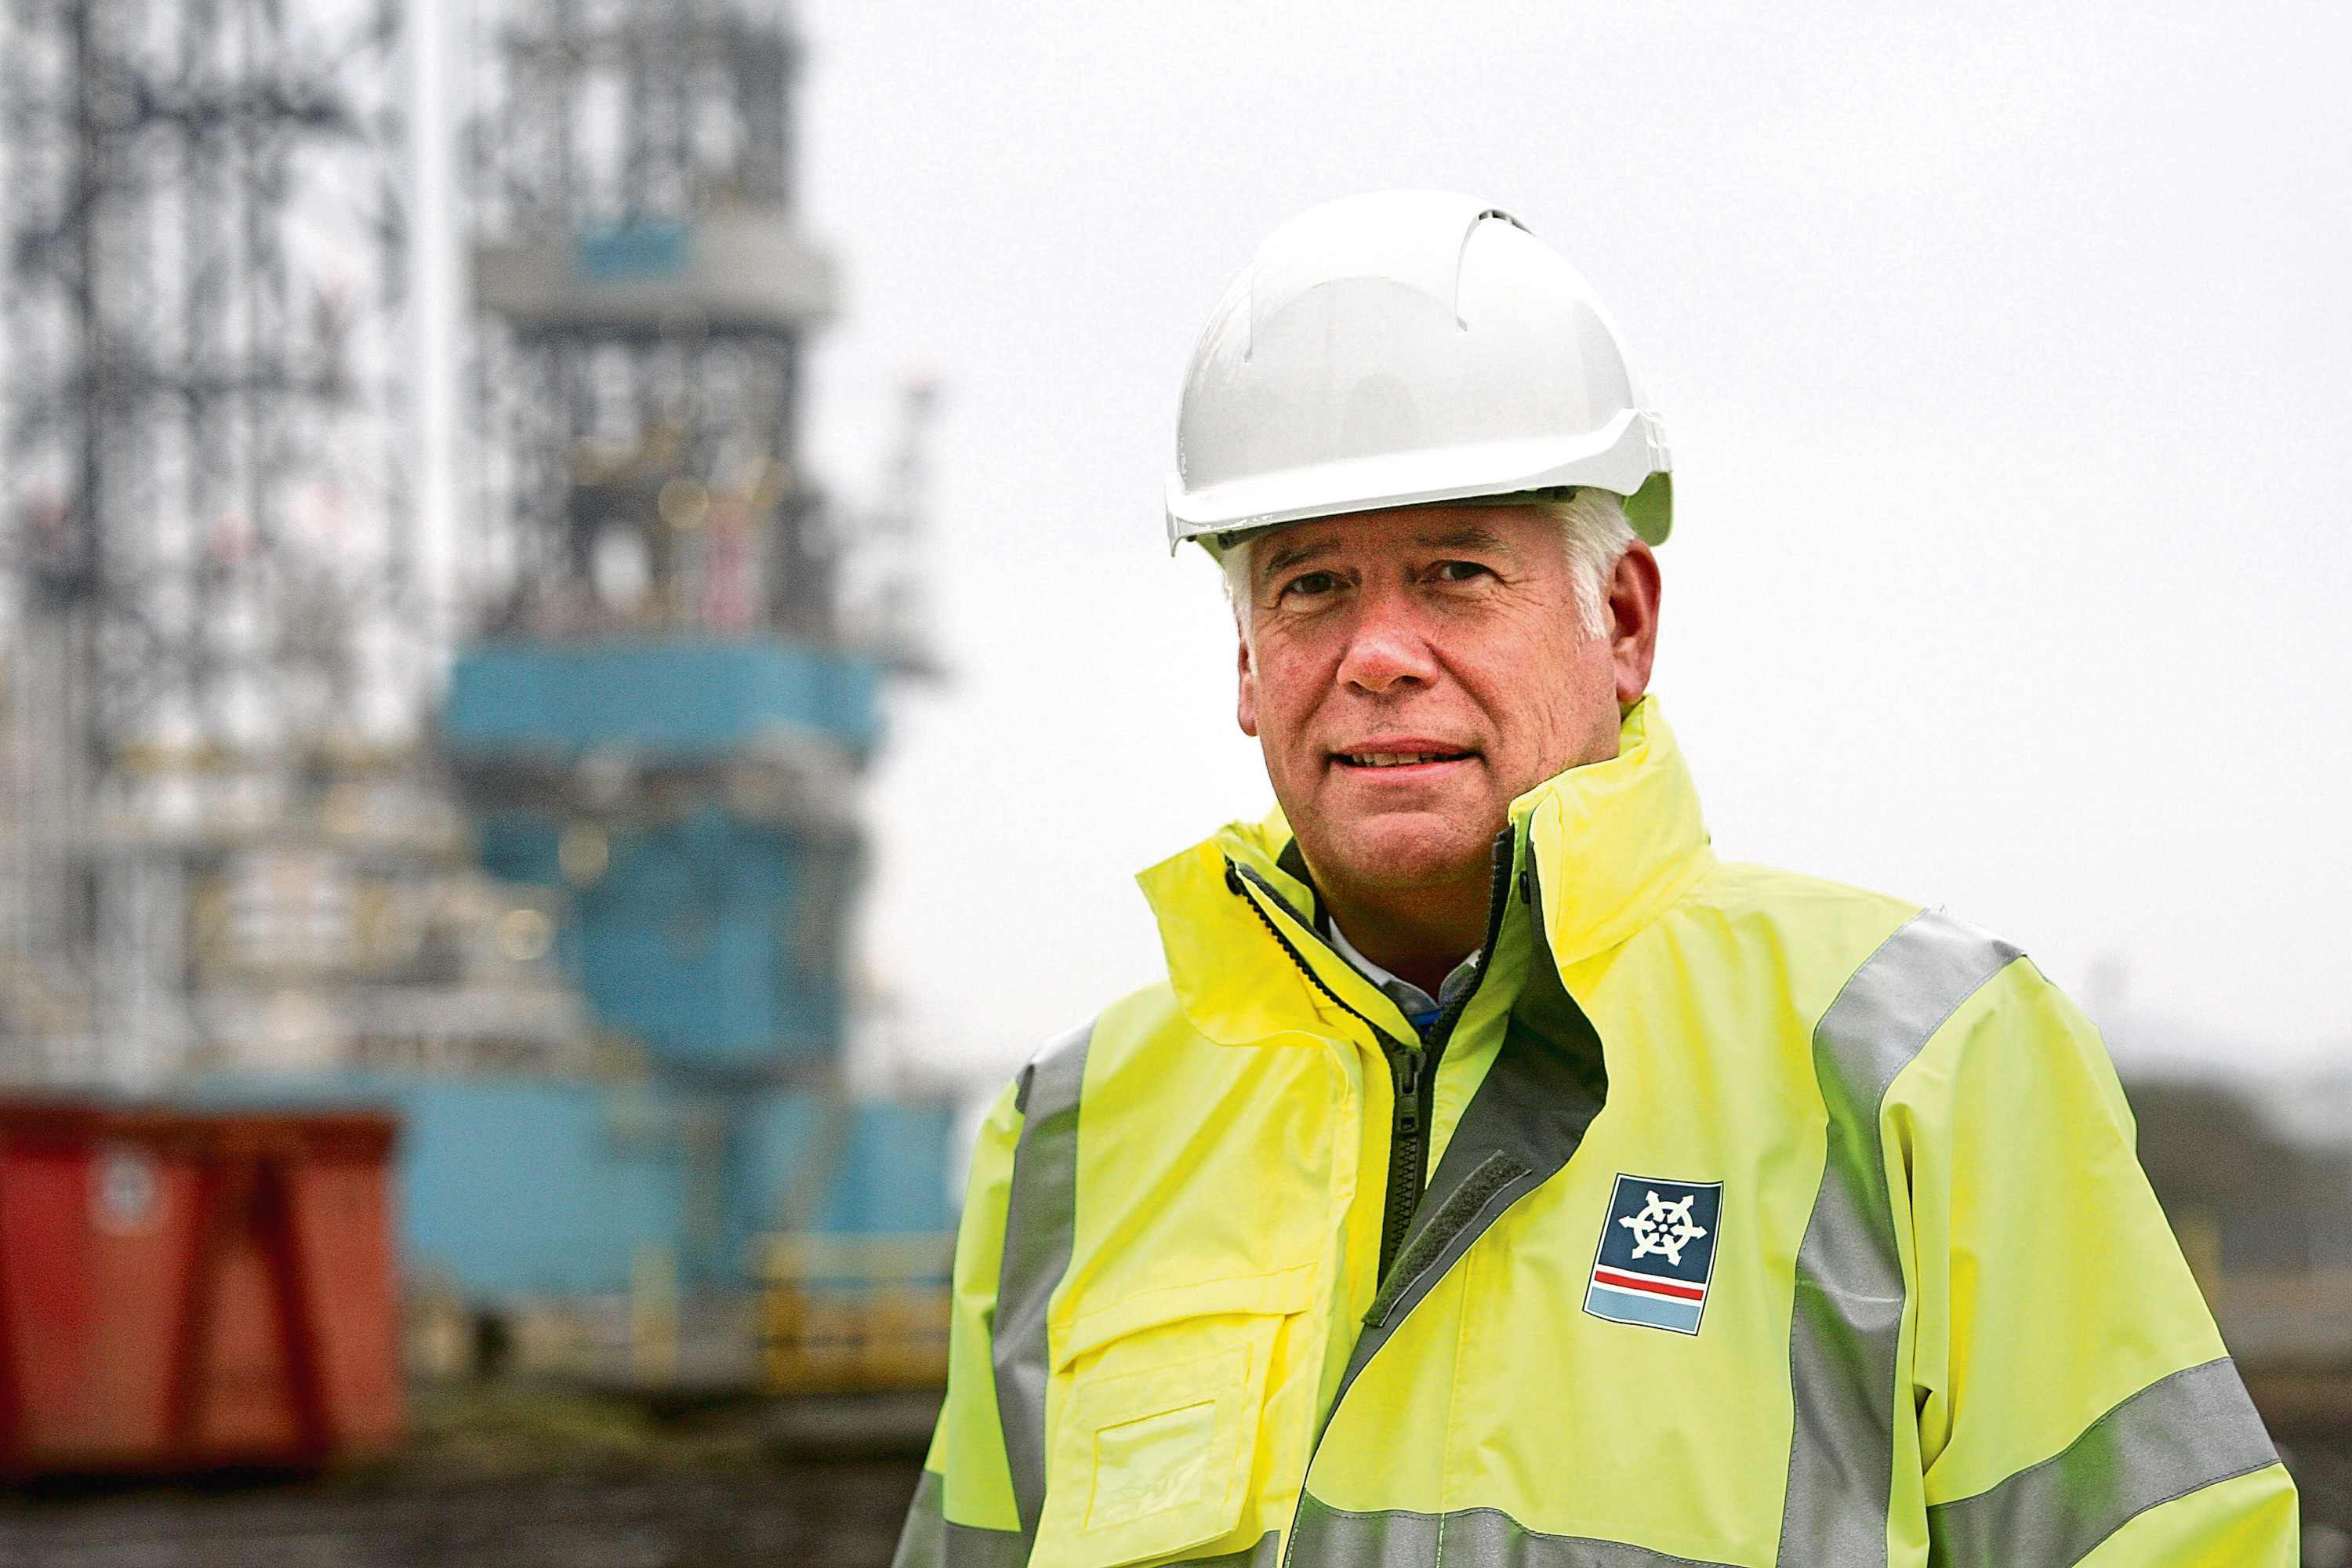 Courier Business. Graham Huband story. Dundeecom (Oil industry decommissioning) work at Prince Charles Wharf  and Forth Ports, Dundee. Picture shows; Callum Falconer, Chief Executive of Dundeecom. Tuesday, 14th February, 2017.